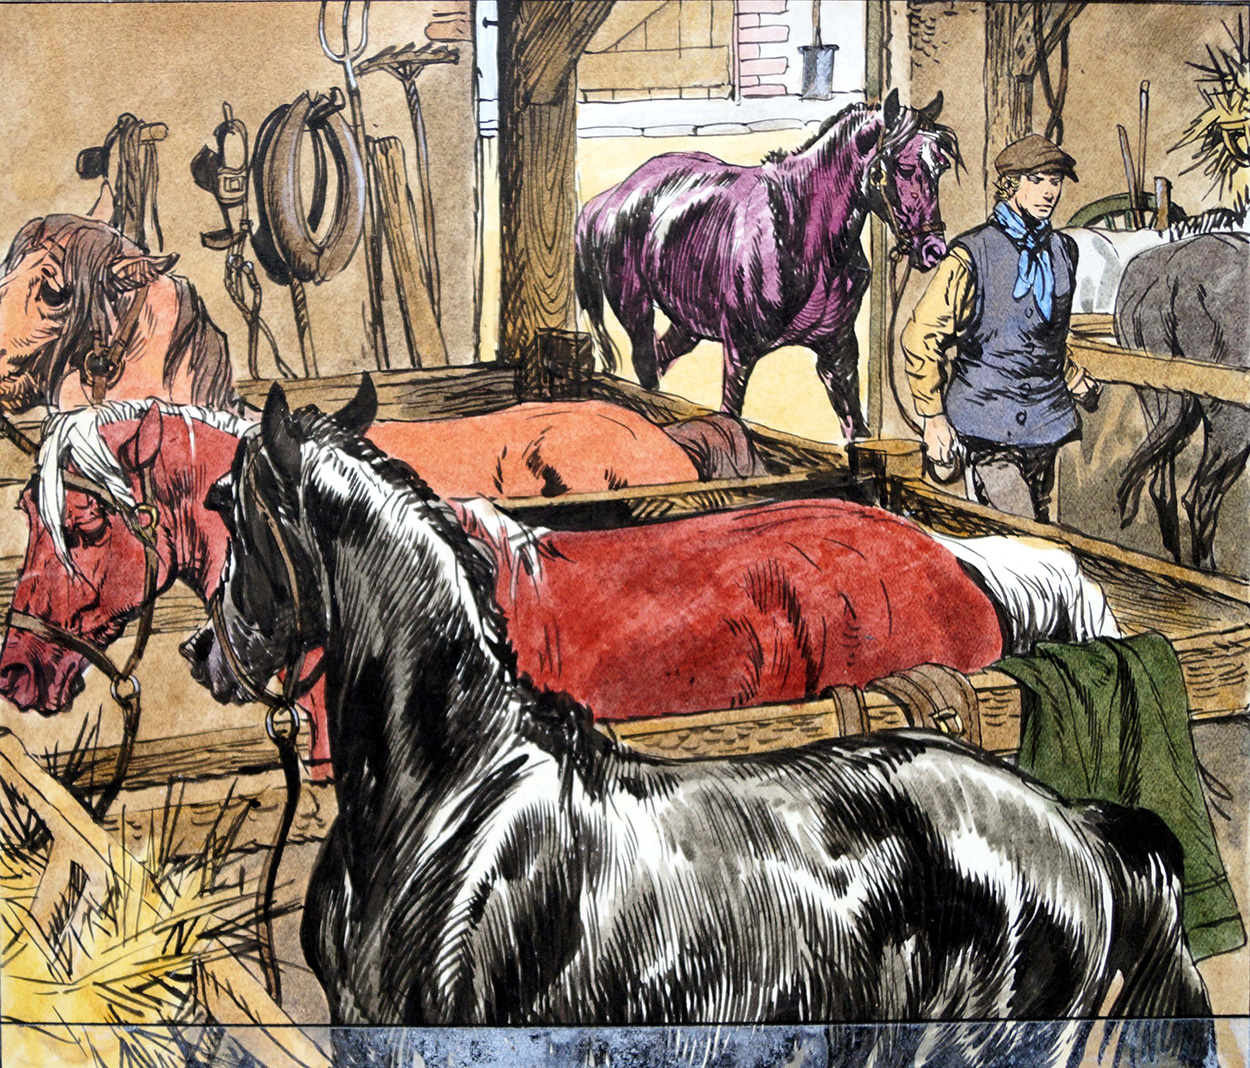 Black Beauty - Together In The Stable (Original) art by Black Beauty (Carlos Roume) Art at The Illustration Art Gallery